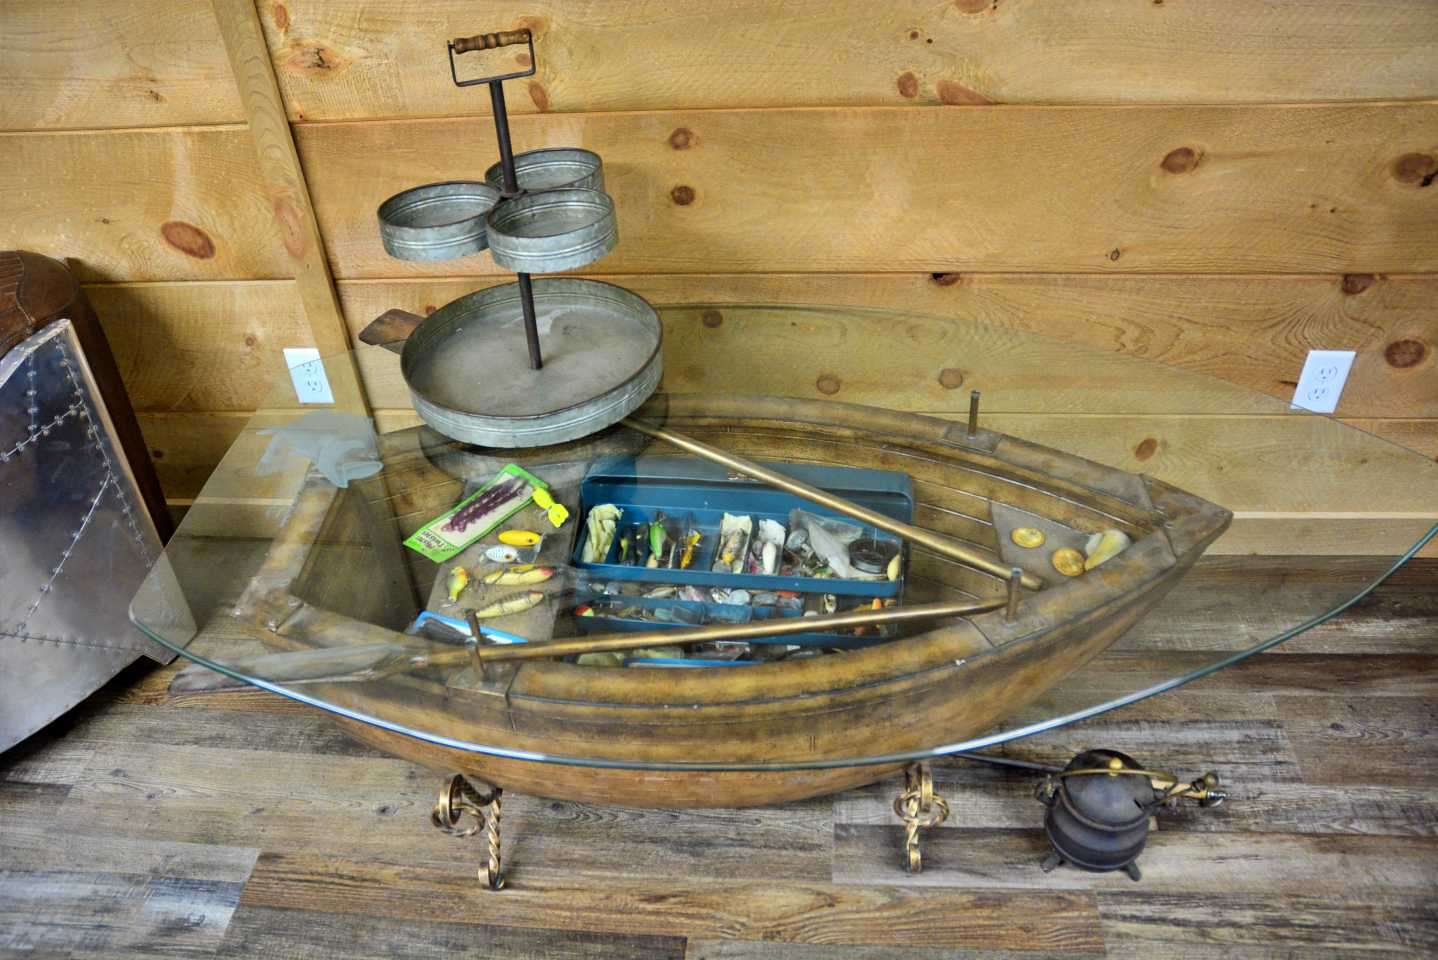 Inside the boat-hulled shaped table is a special family heirloom. The centerpiece is his grandfatherâs tacklebox, and filled with lures used by him on Lake Chickamauga and elsewhere. 